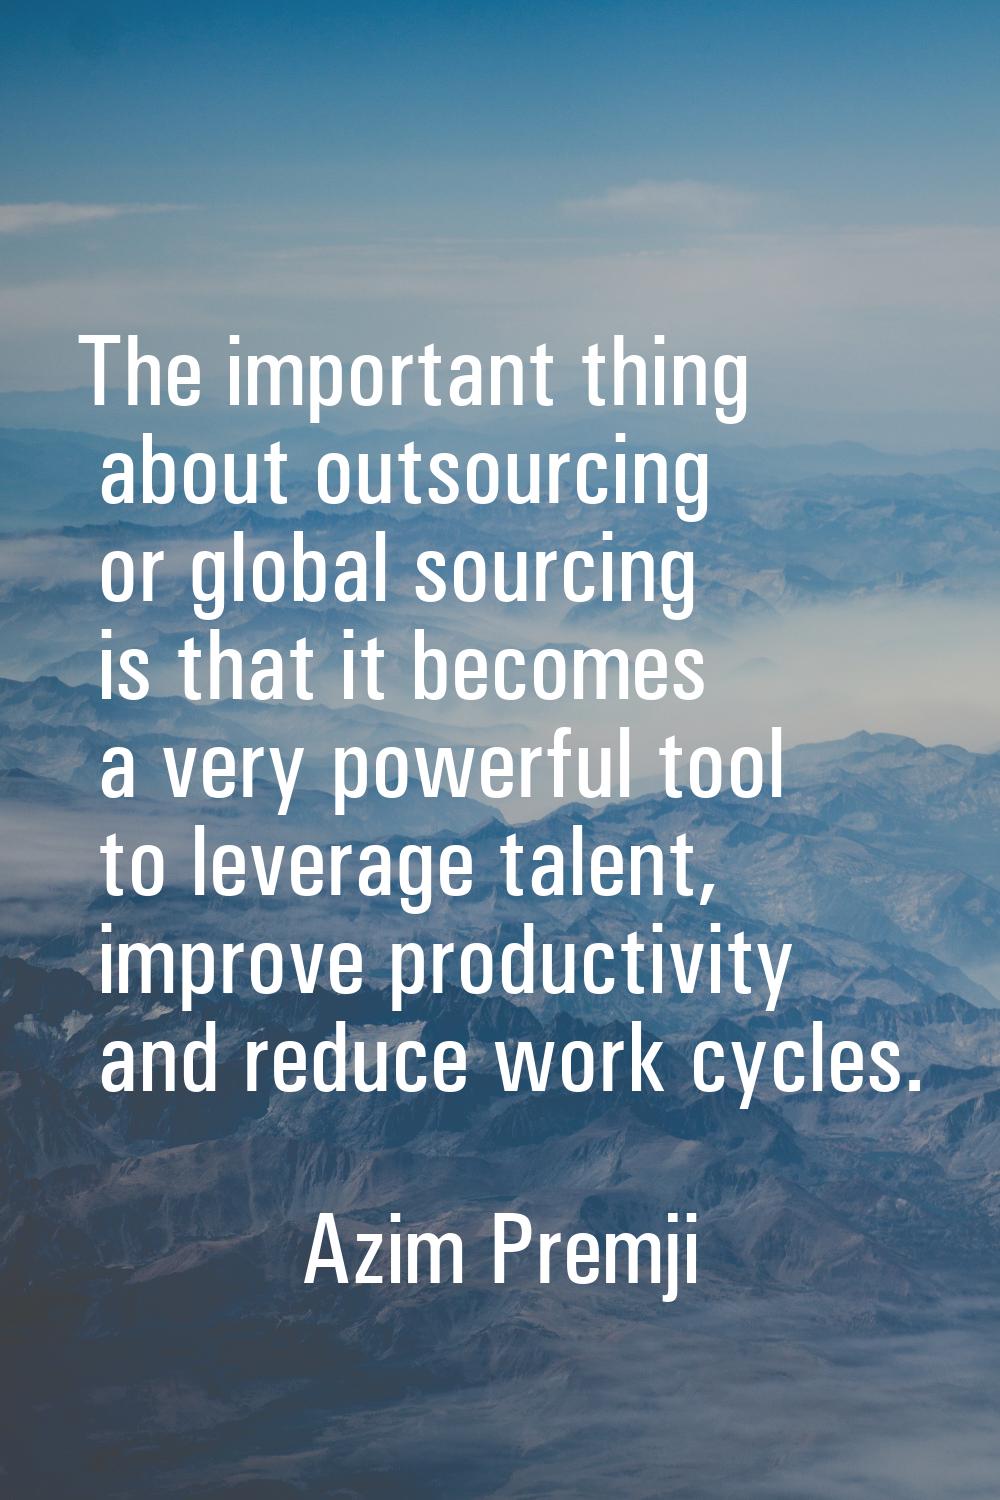 The important thing about outsourcing or global sourcing is that it becomes a very powerful tool to